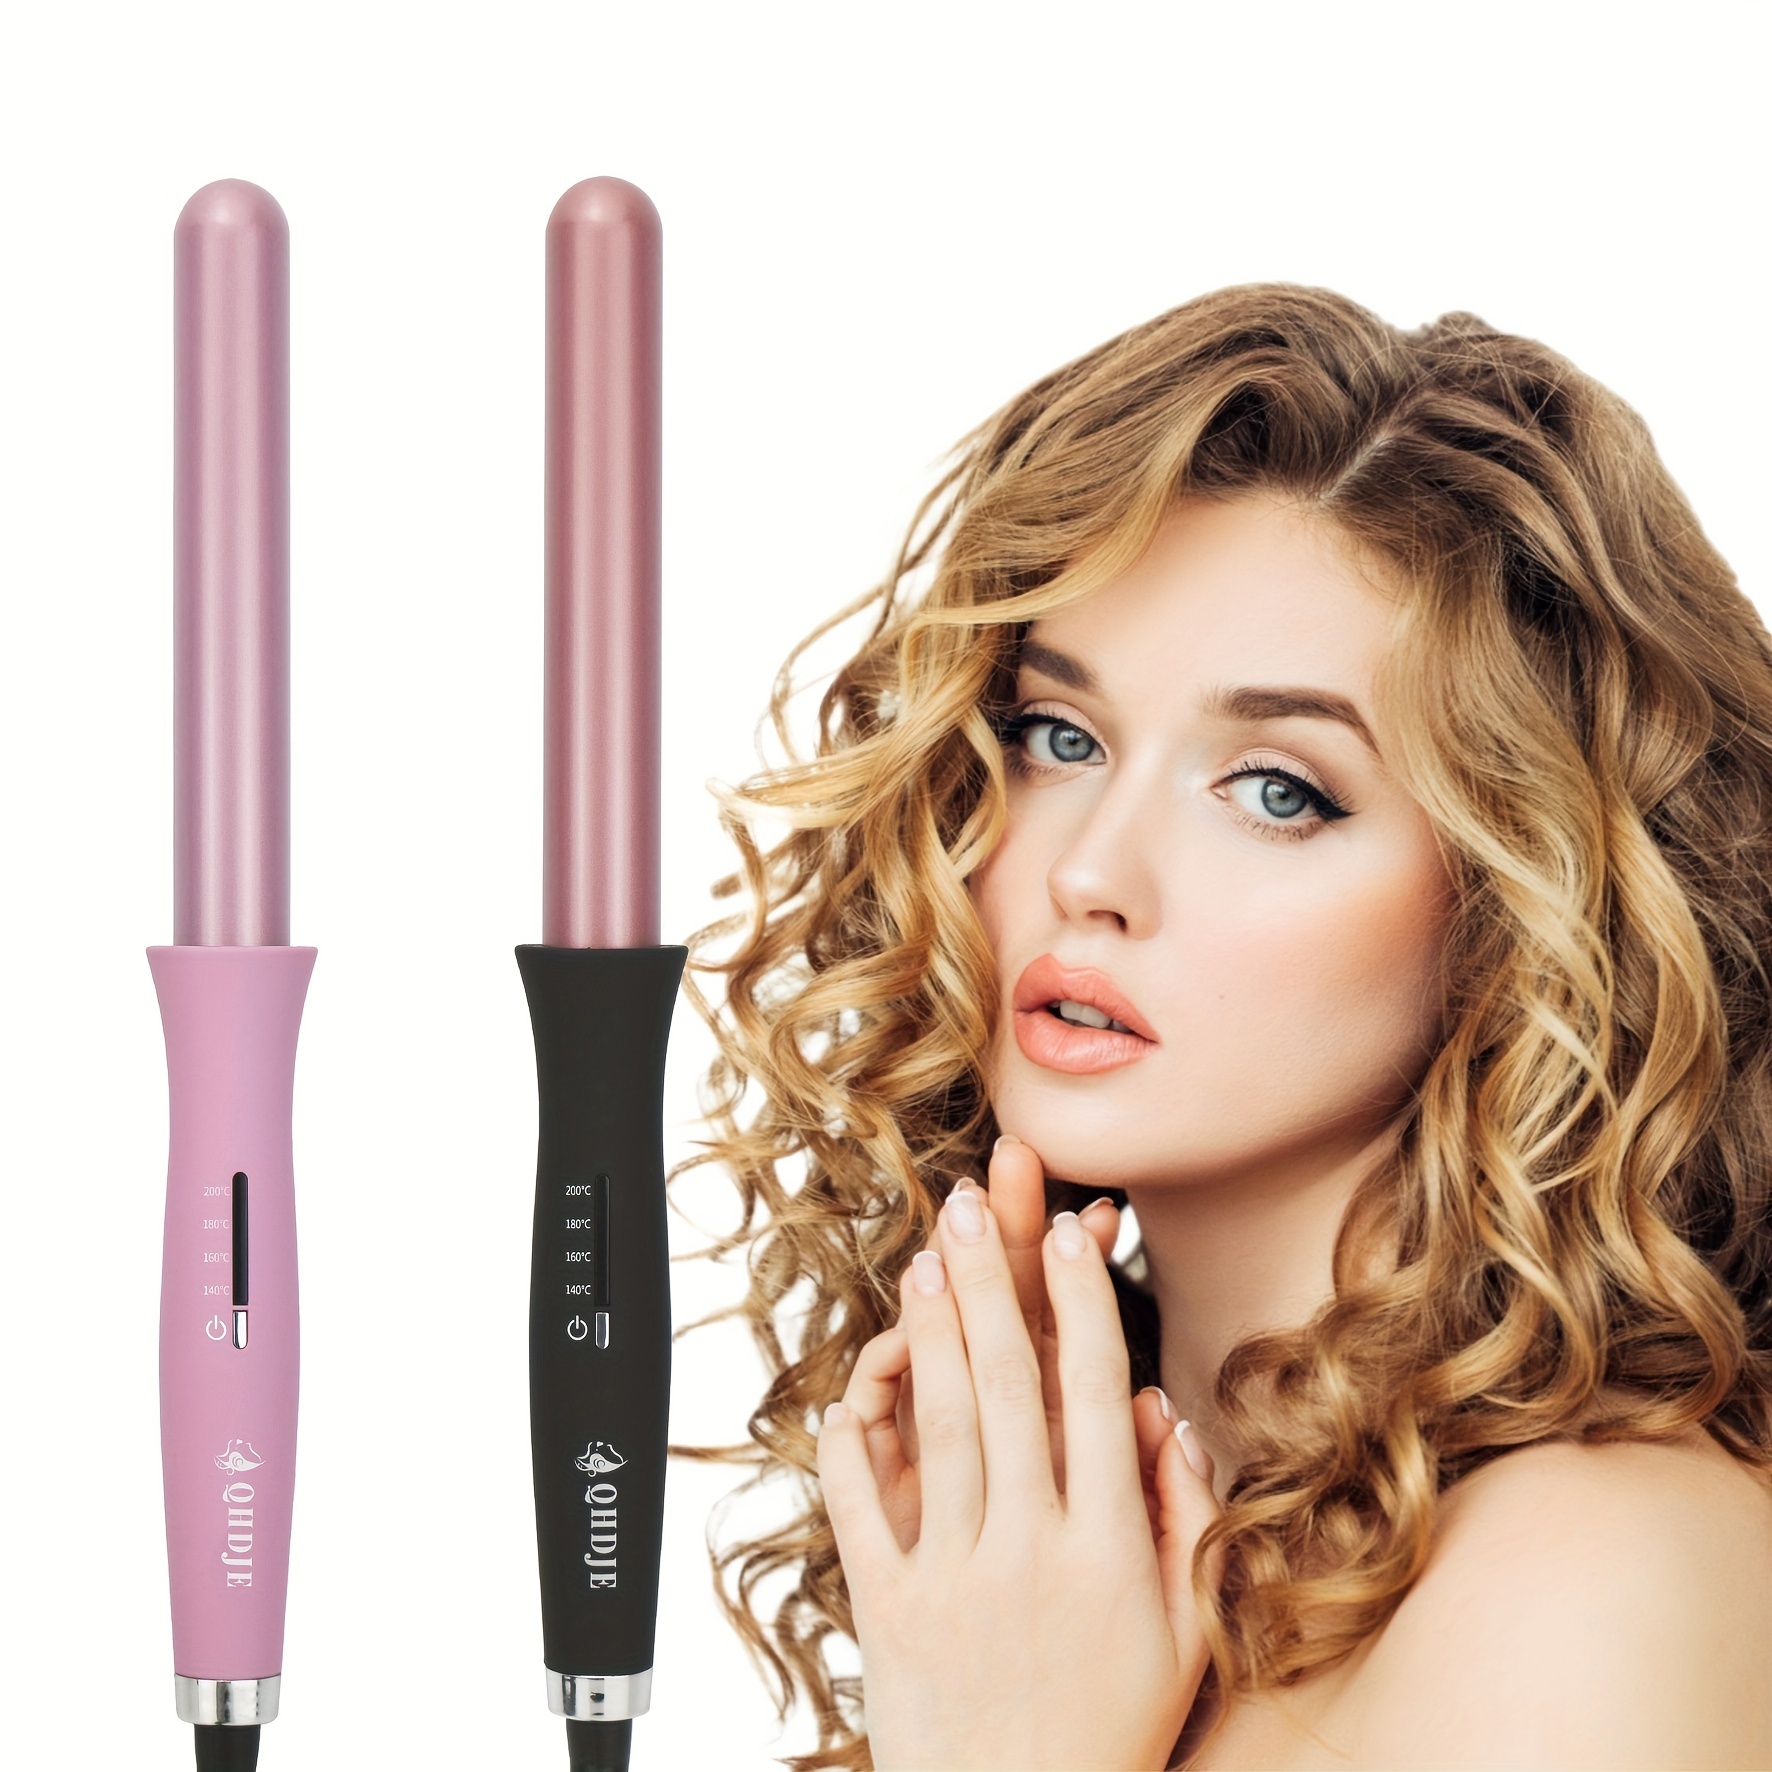 25mm french  curly hair styling curling iron automatic hair curling wand hair styling curler for diy salon professional use for all hair types details 1